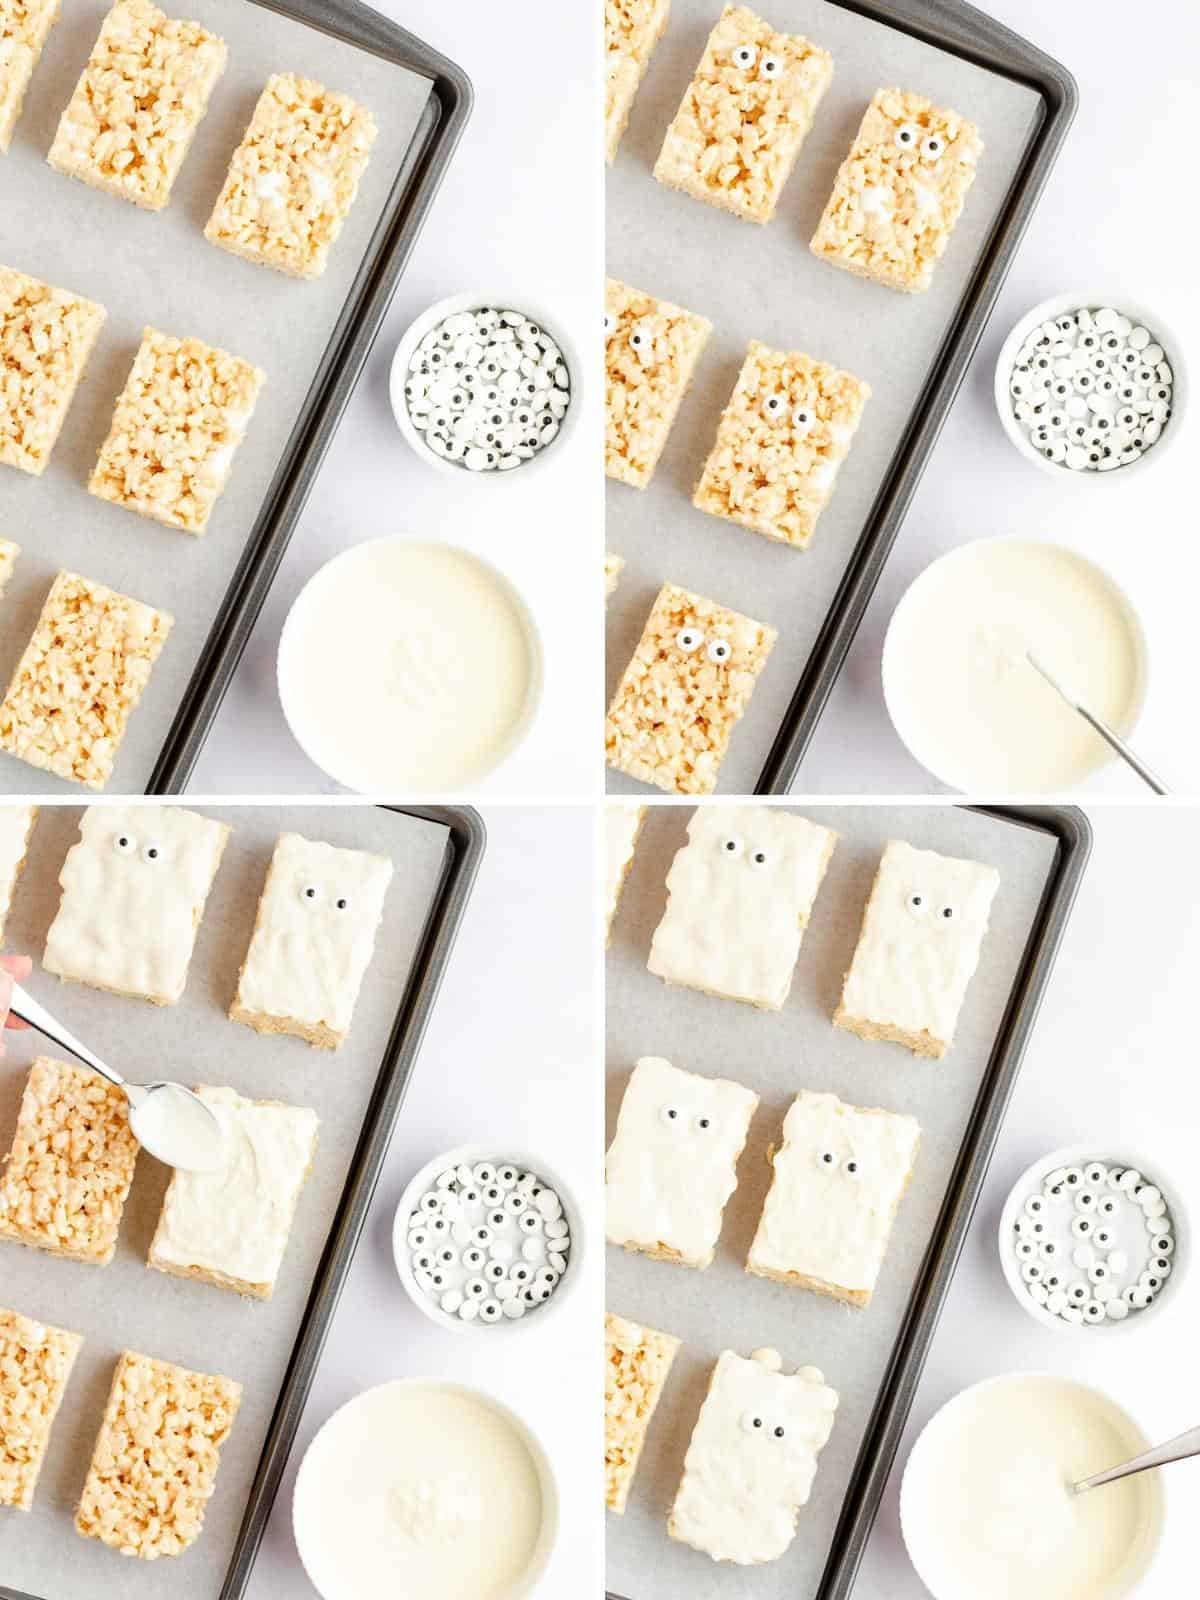 Collage image showing steps to add white chocolate and candy eyes to rice krispie treats.